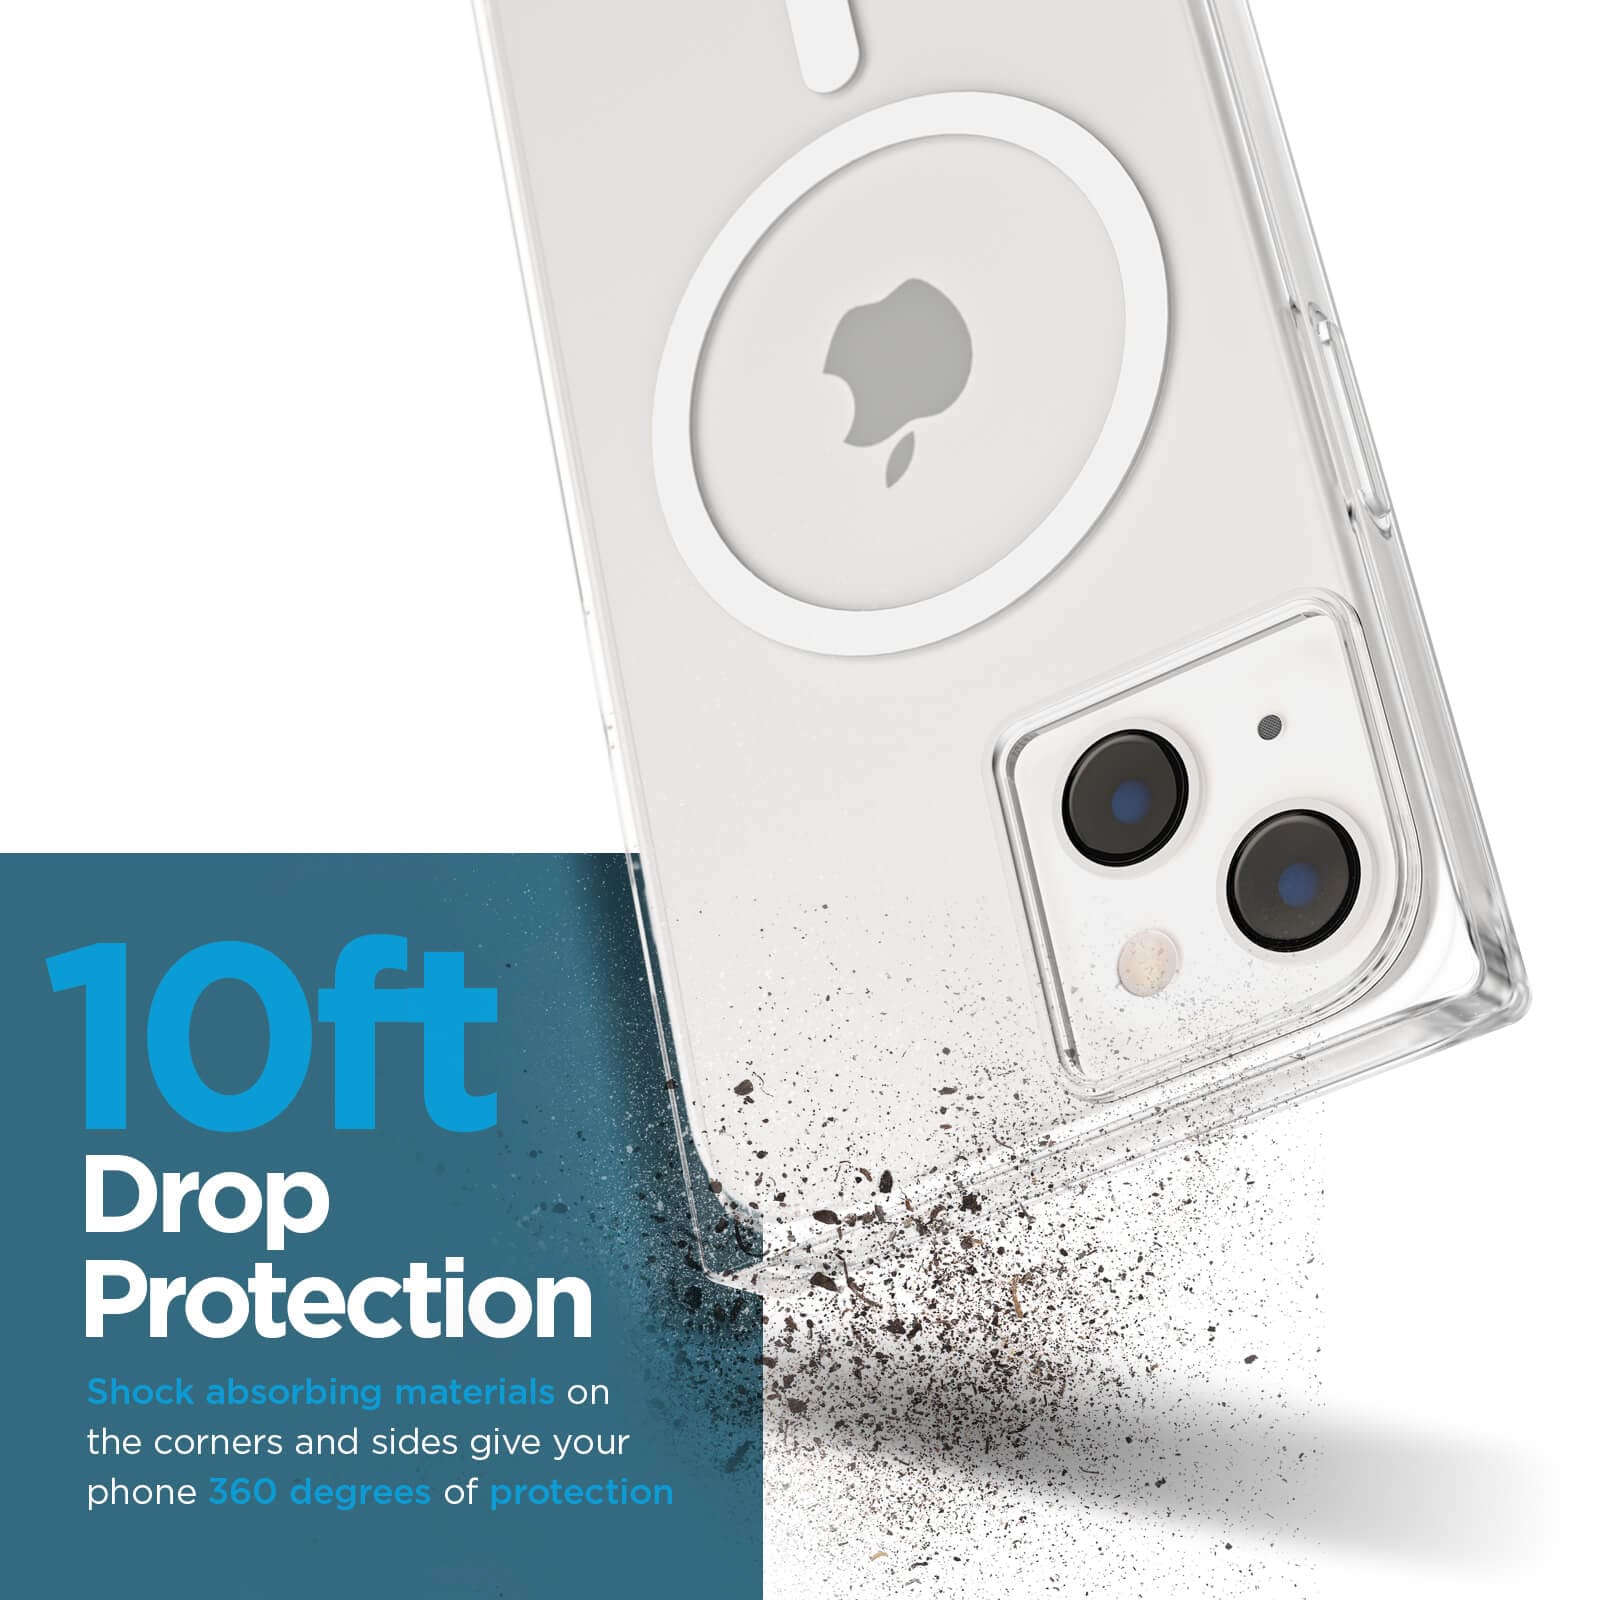 10ft drop protection. Shock absorbing materials on the corners and sides give your phone 360 degrees of protection. color::Clear